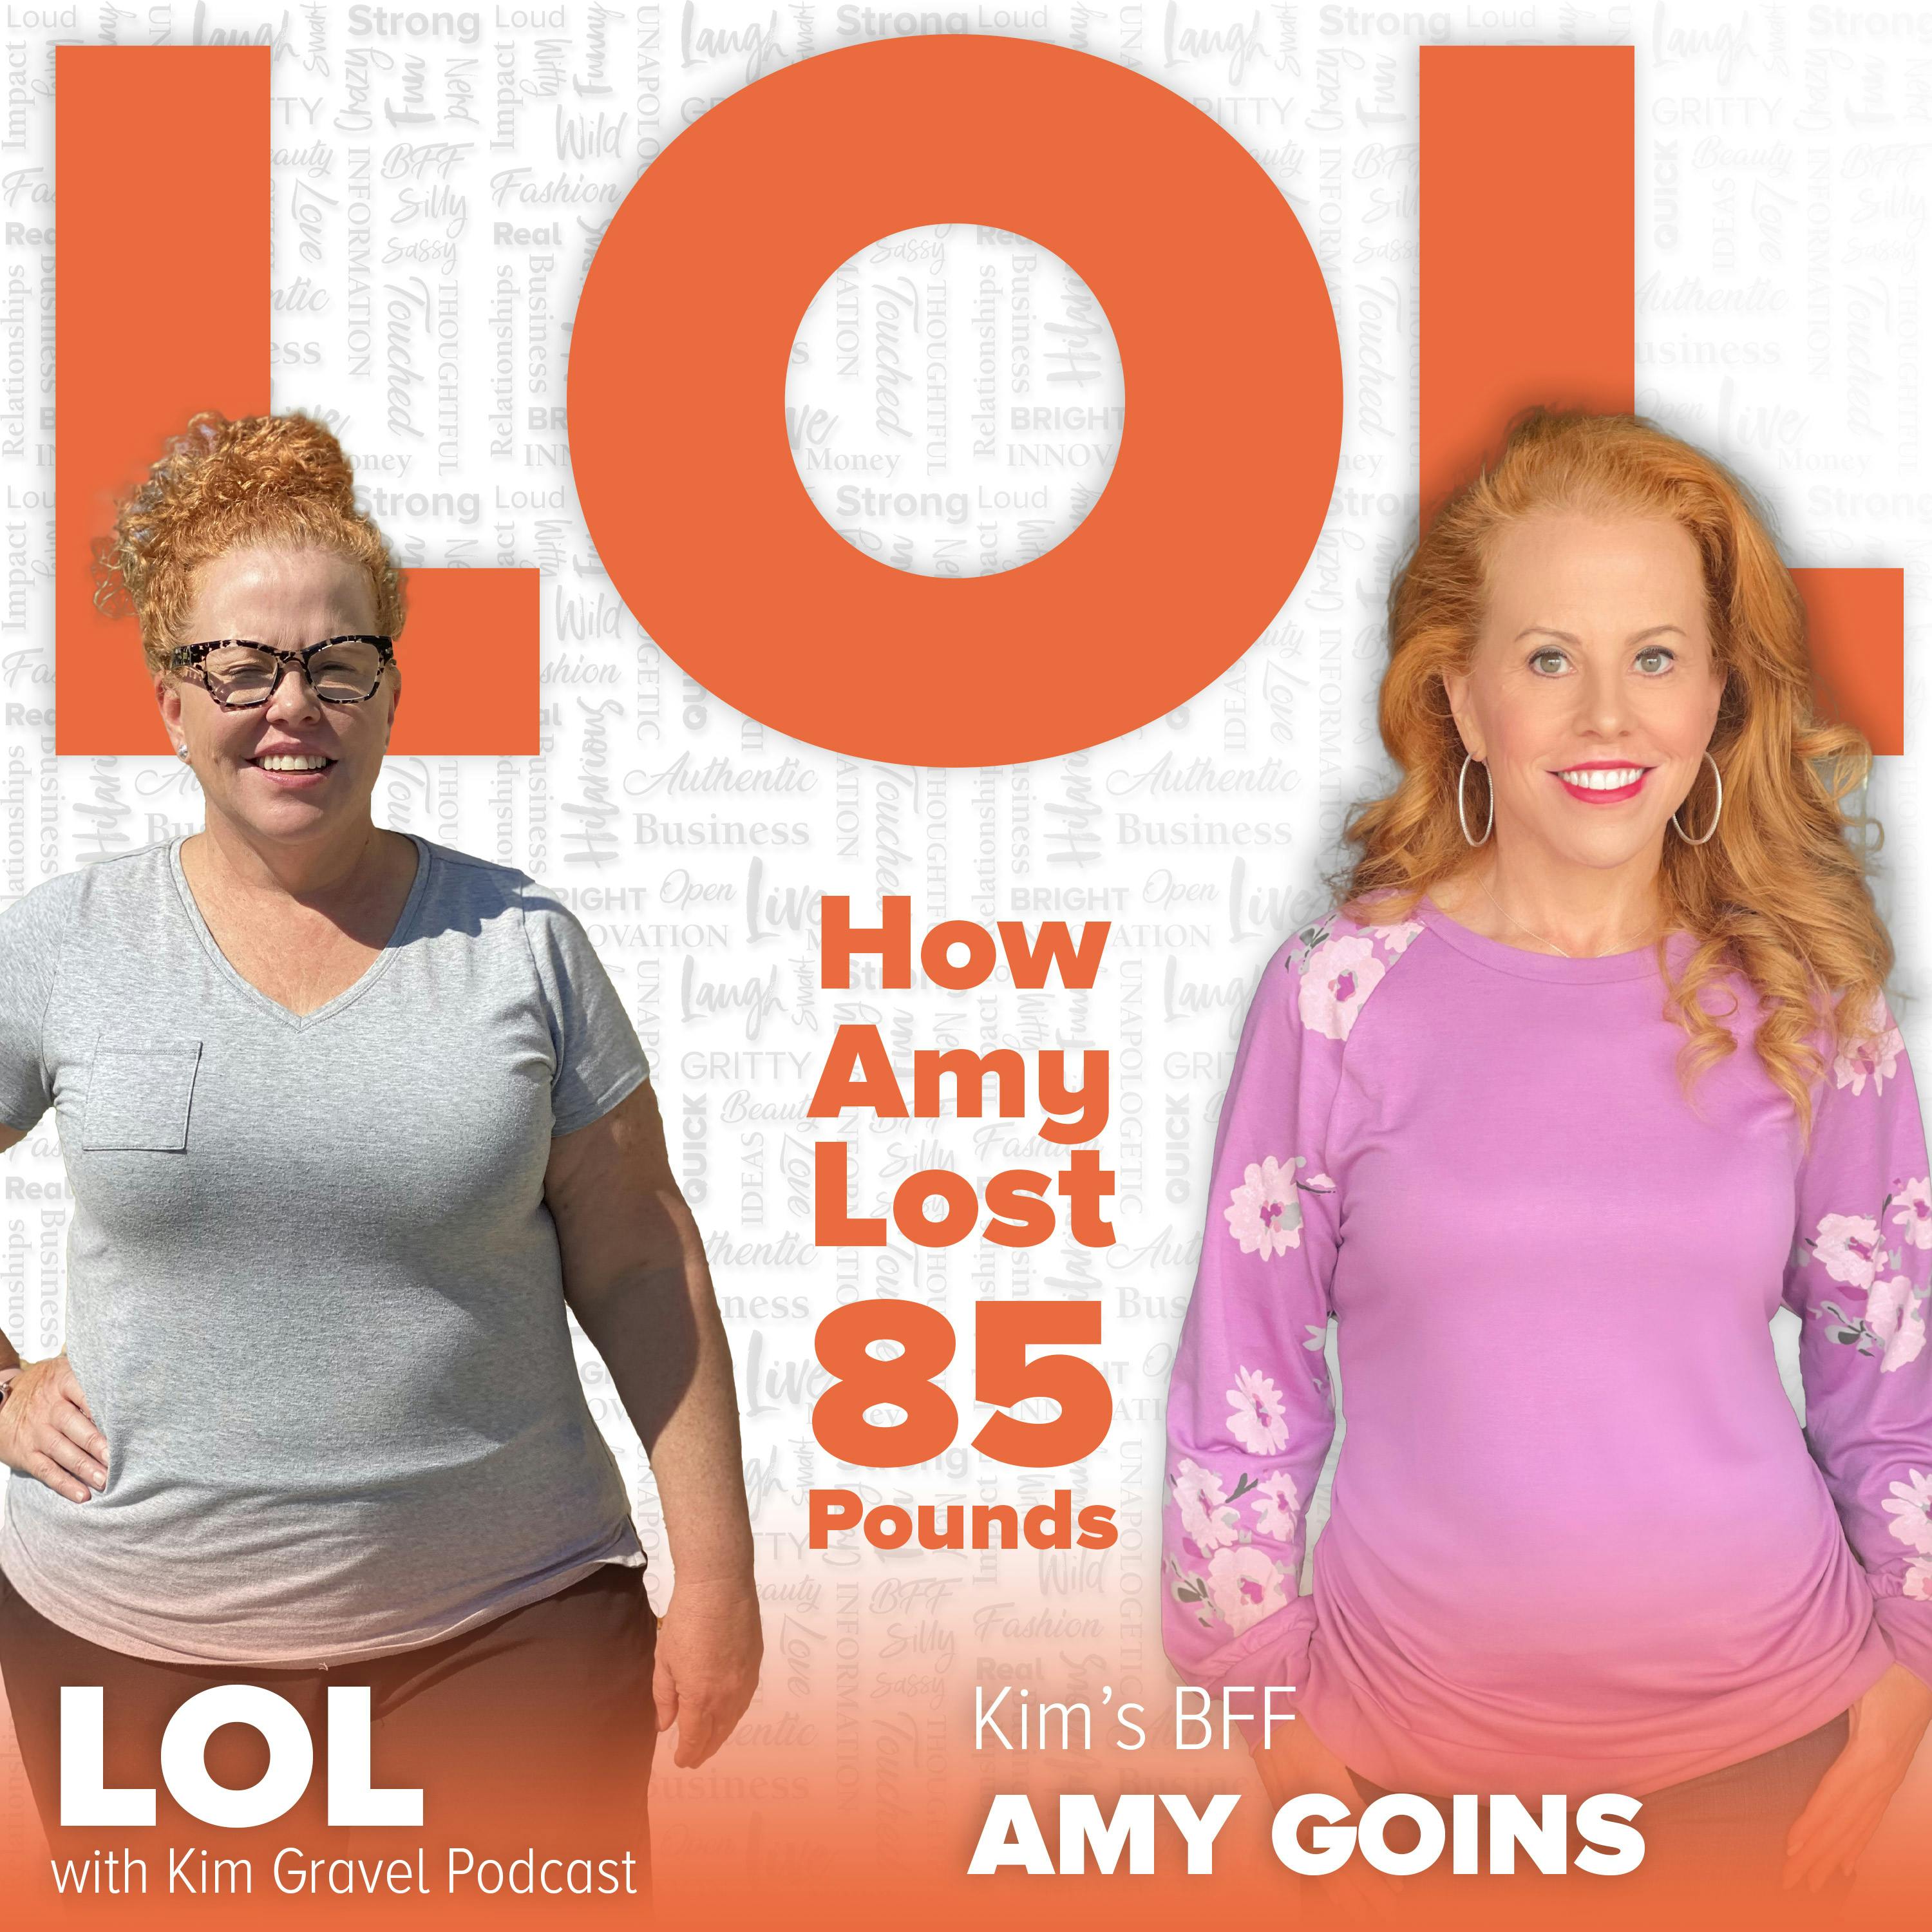 How Amy Lost 85 Pounds with Amy Goins